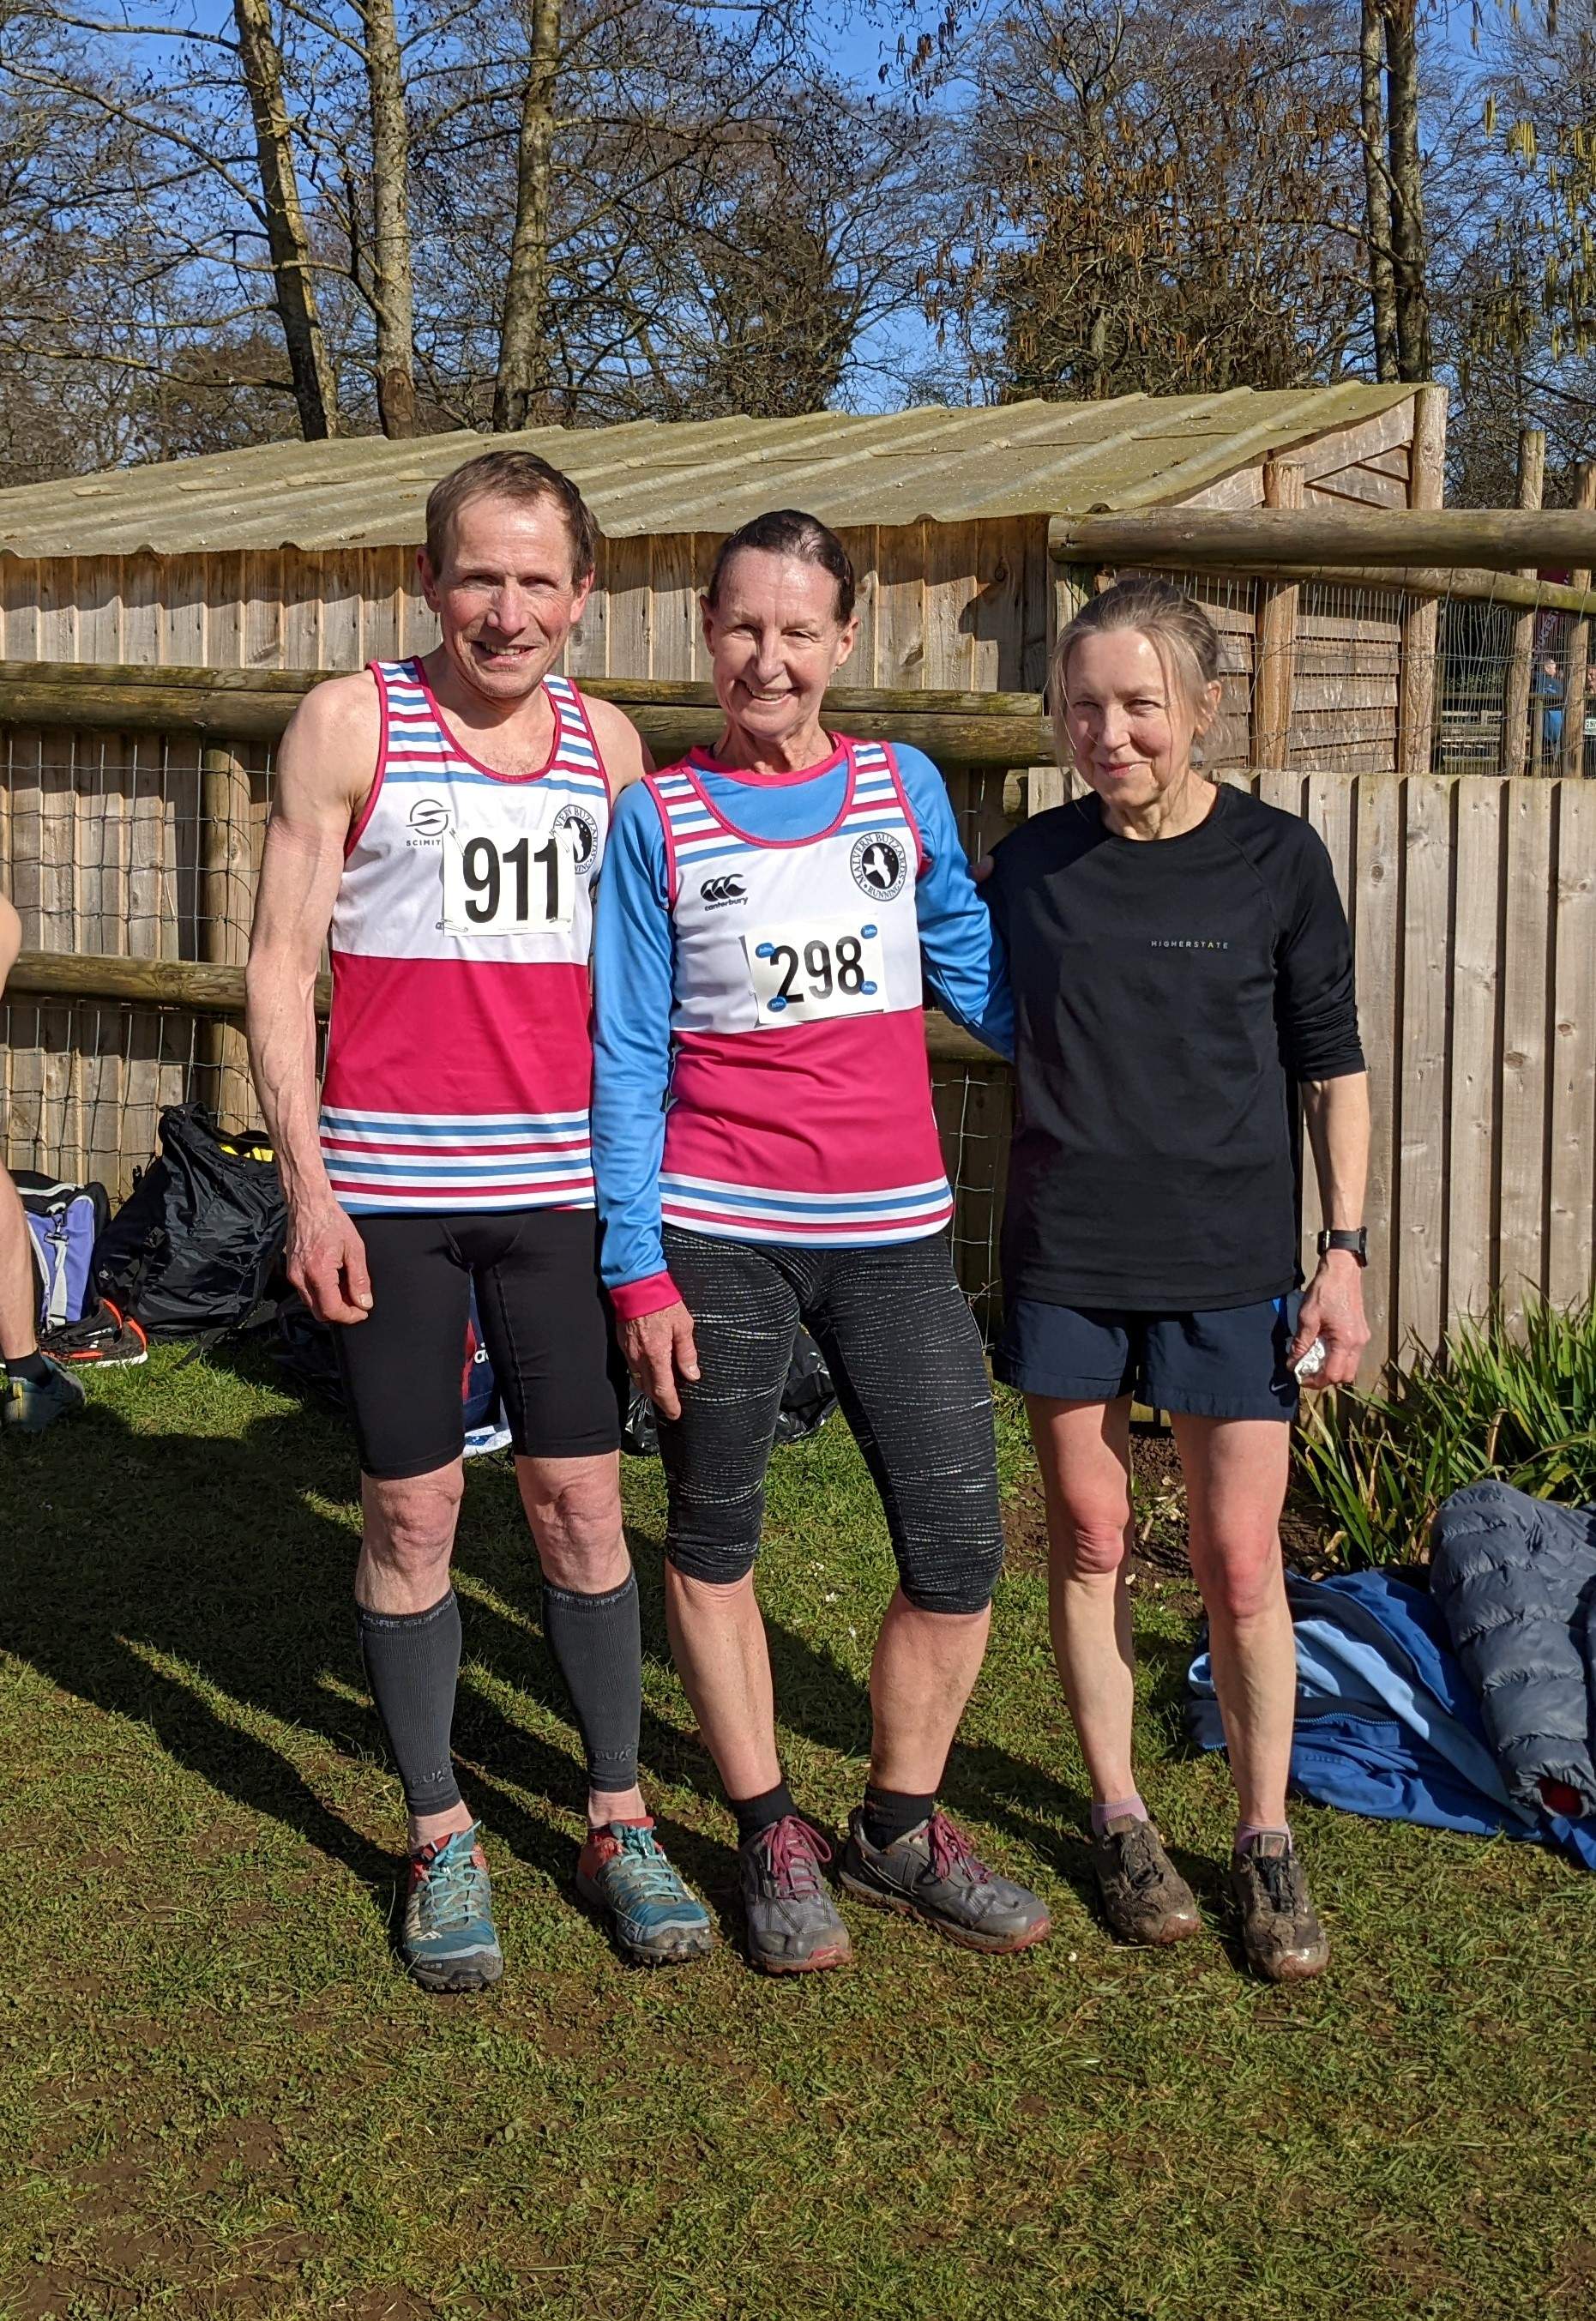 Gloucestershire cross country league - Saturday 5th March 2022